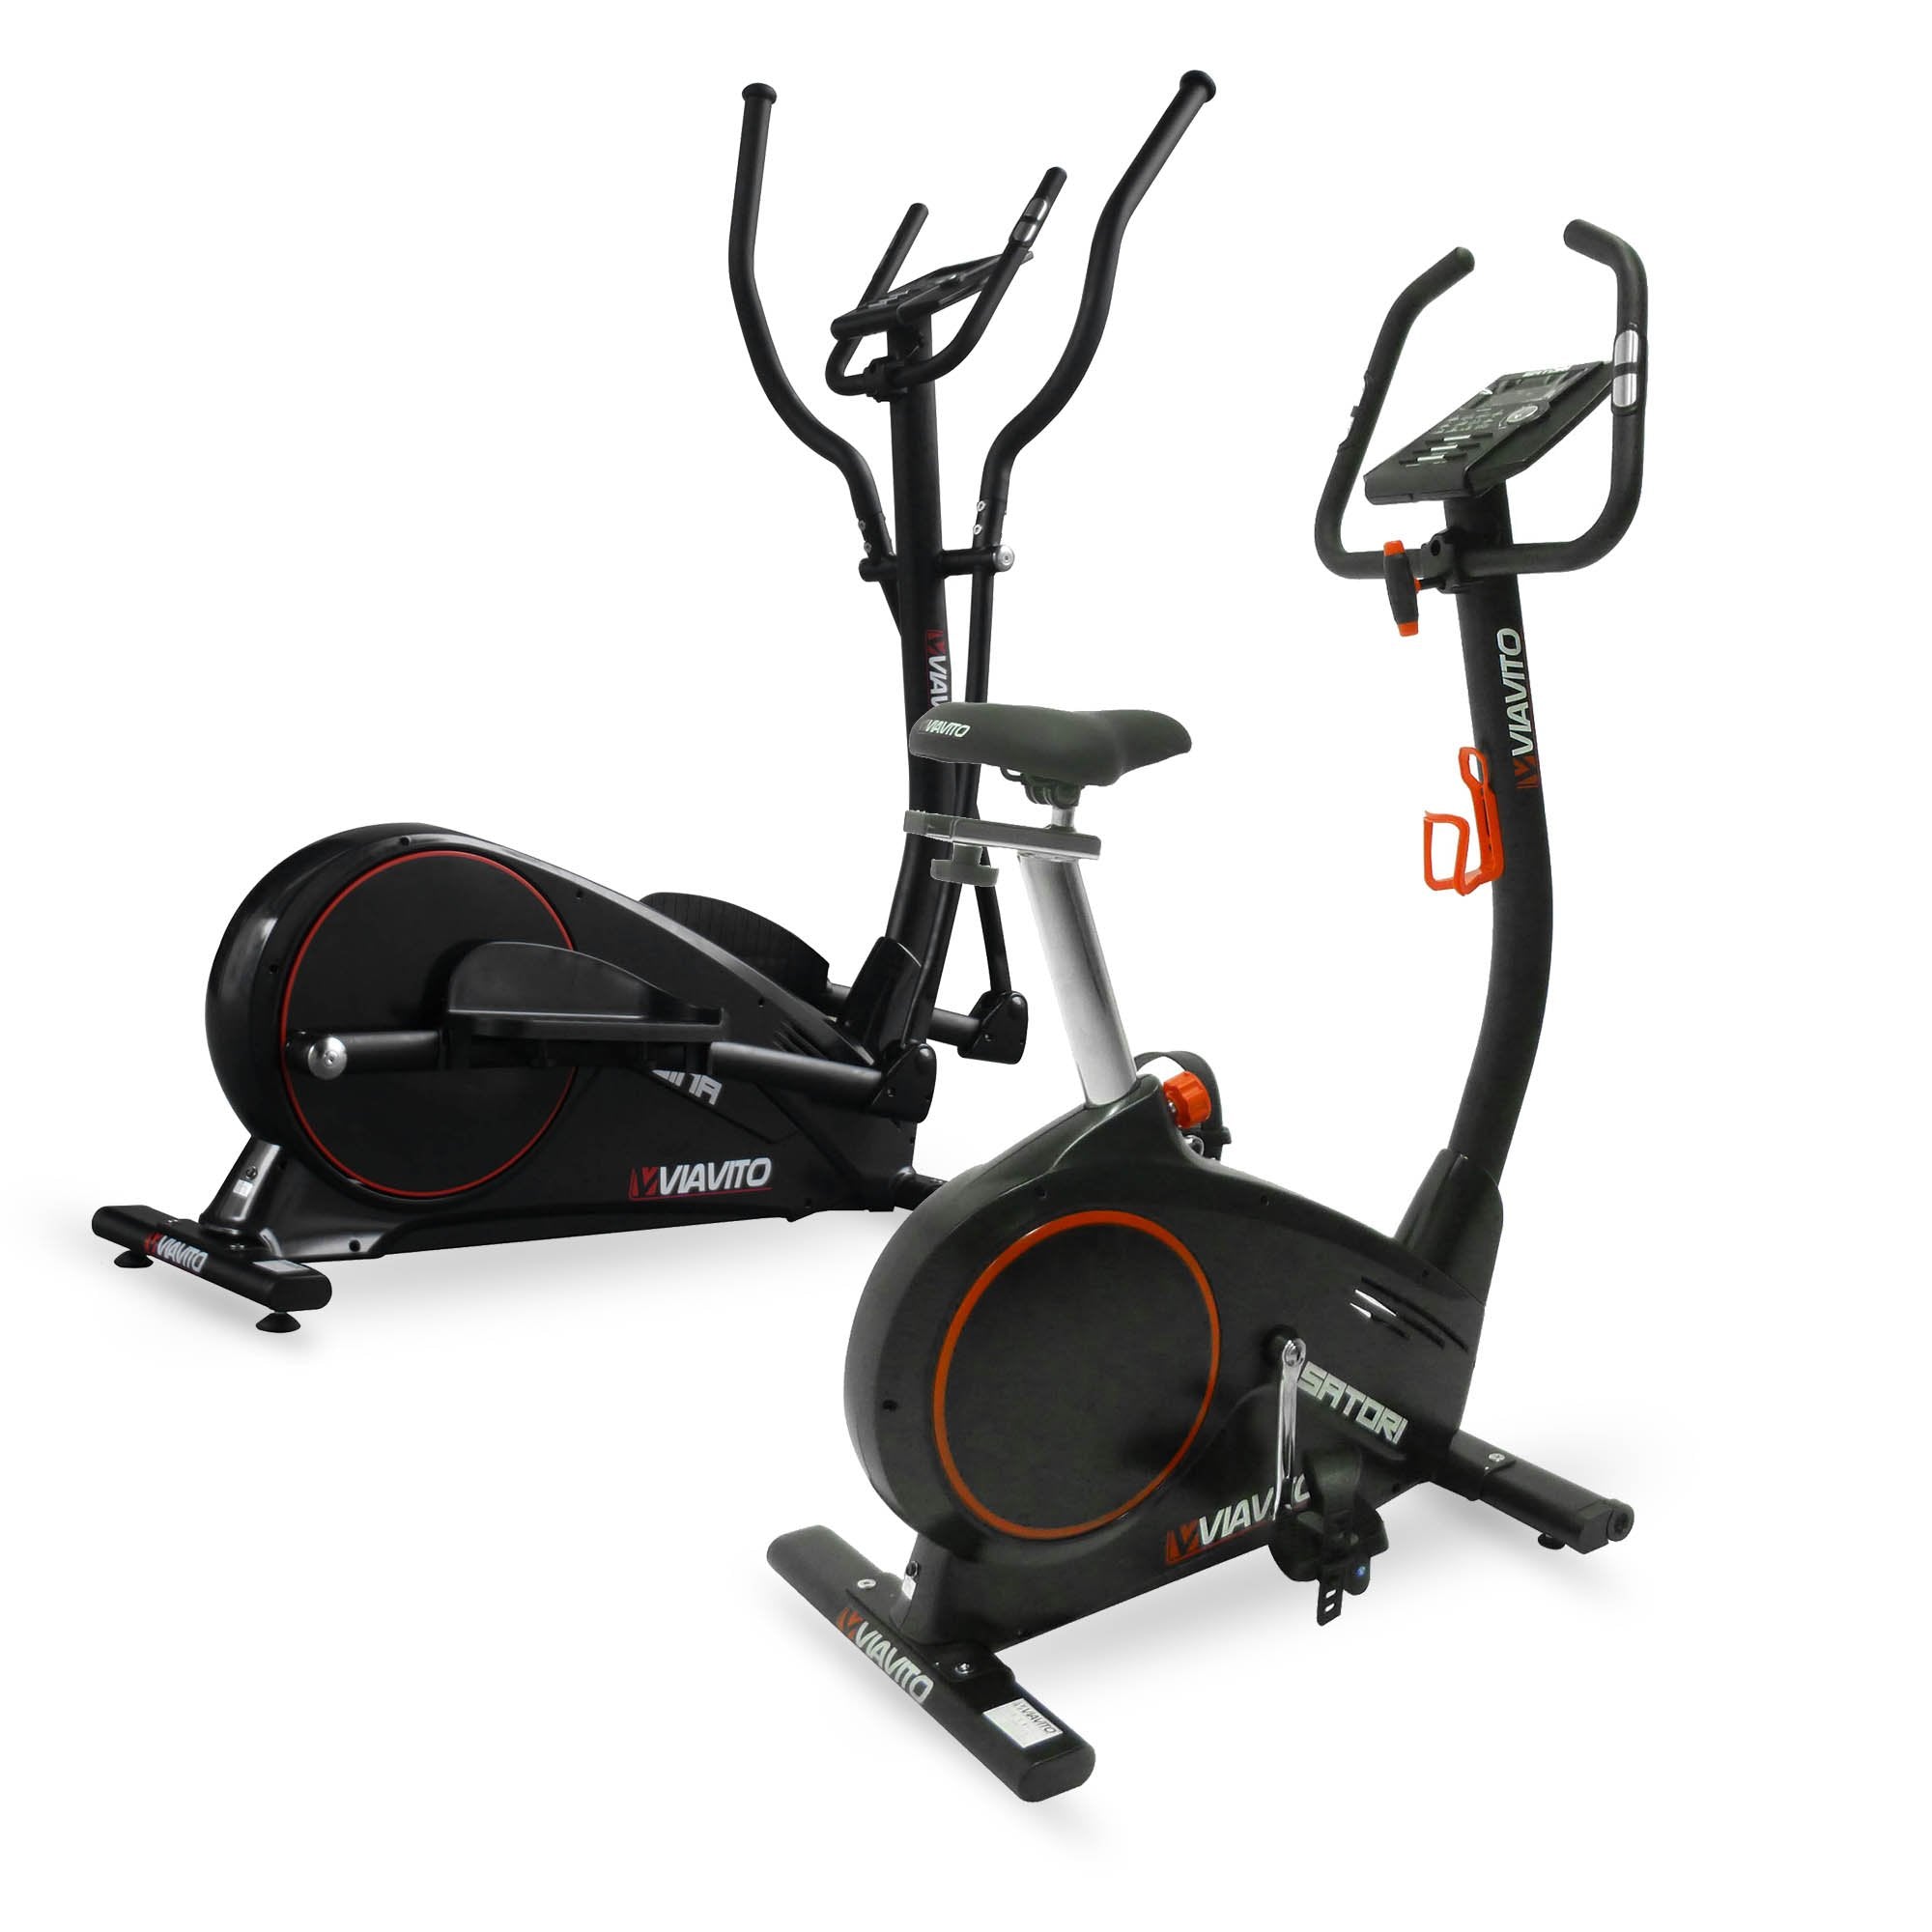 Image of Viavito Select Fitness Package